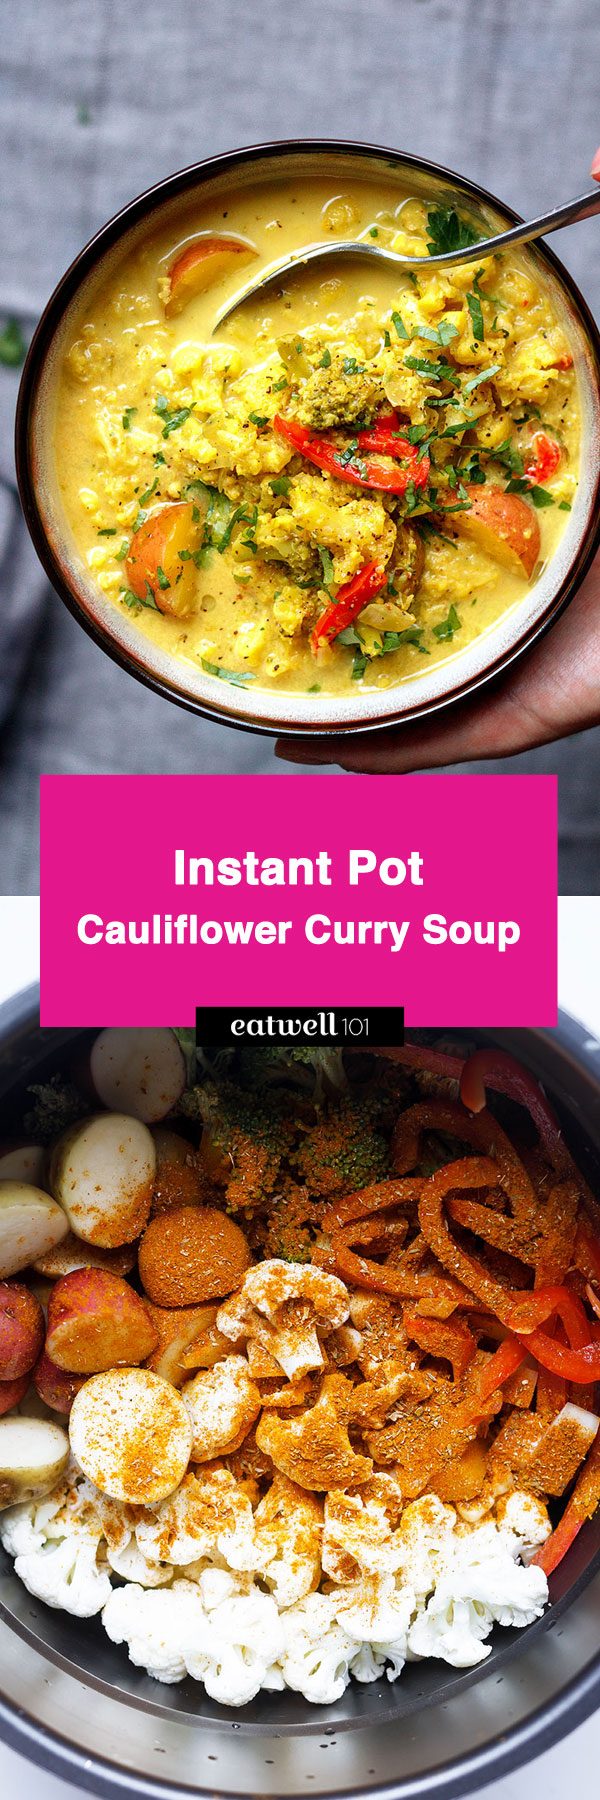 Instant Pot Cauliflower Curry Soup - #cauliflower #broccoli #soup #Instant-pot #recipe #eatwell101 - Super nutritious and so easy to make!